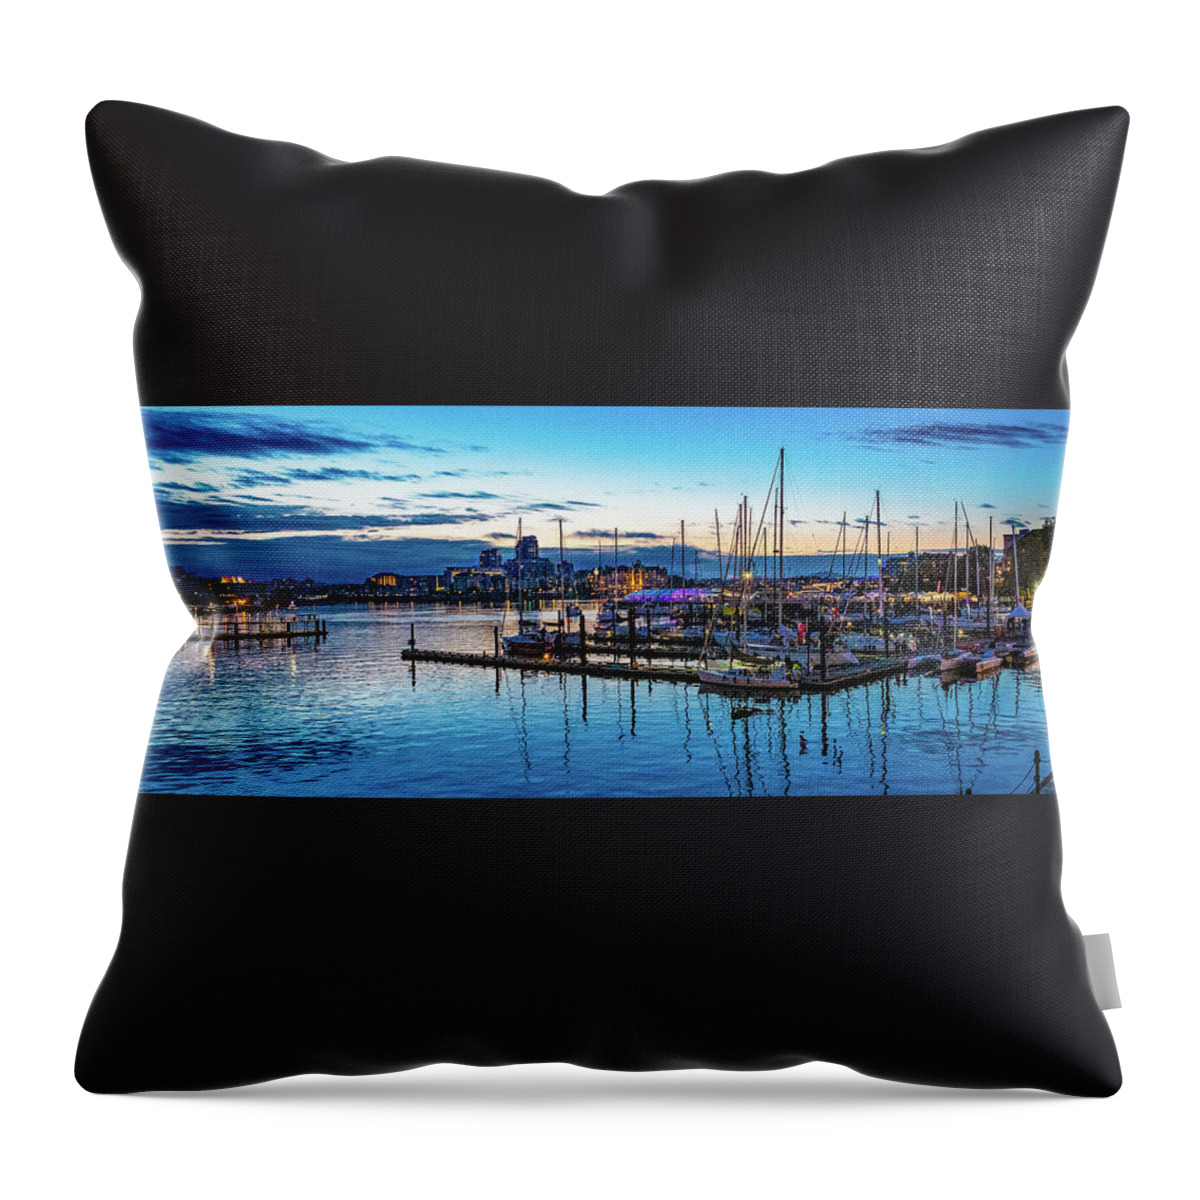 Sunset Throw Pillow featuring the digital art Sunset over a Harbor in Victoria British Columbia by SnapHappy Photos